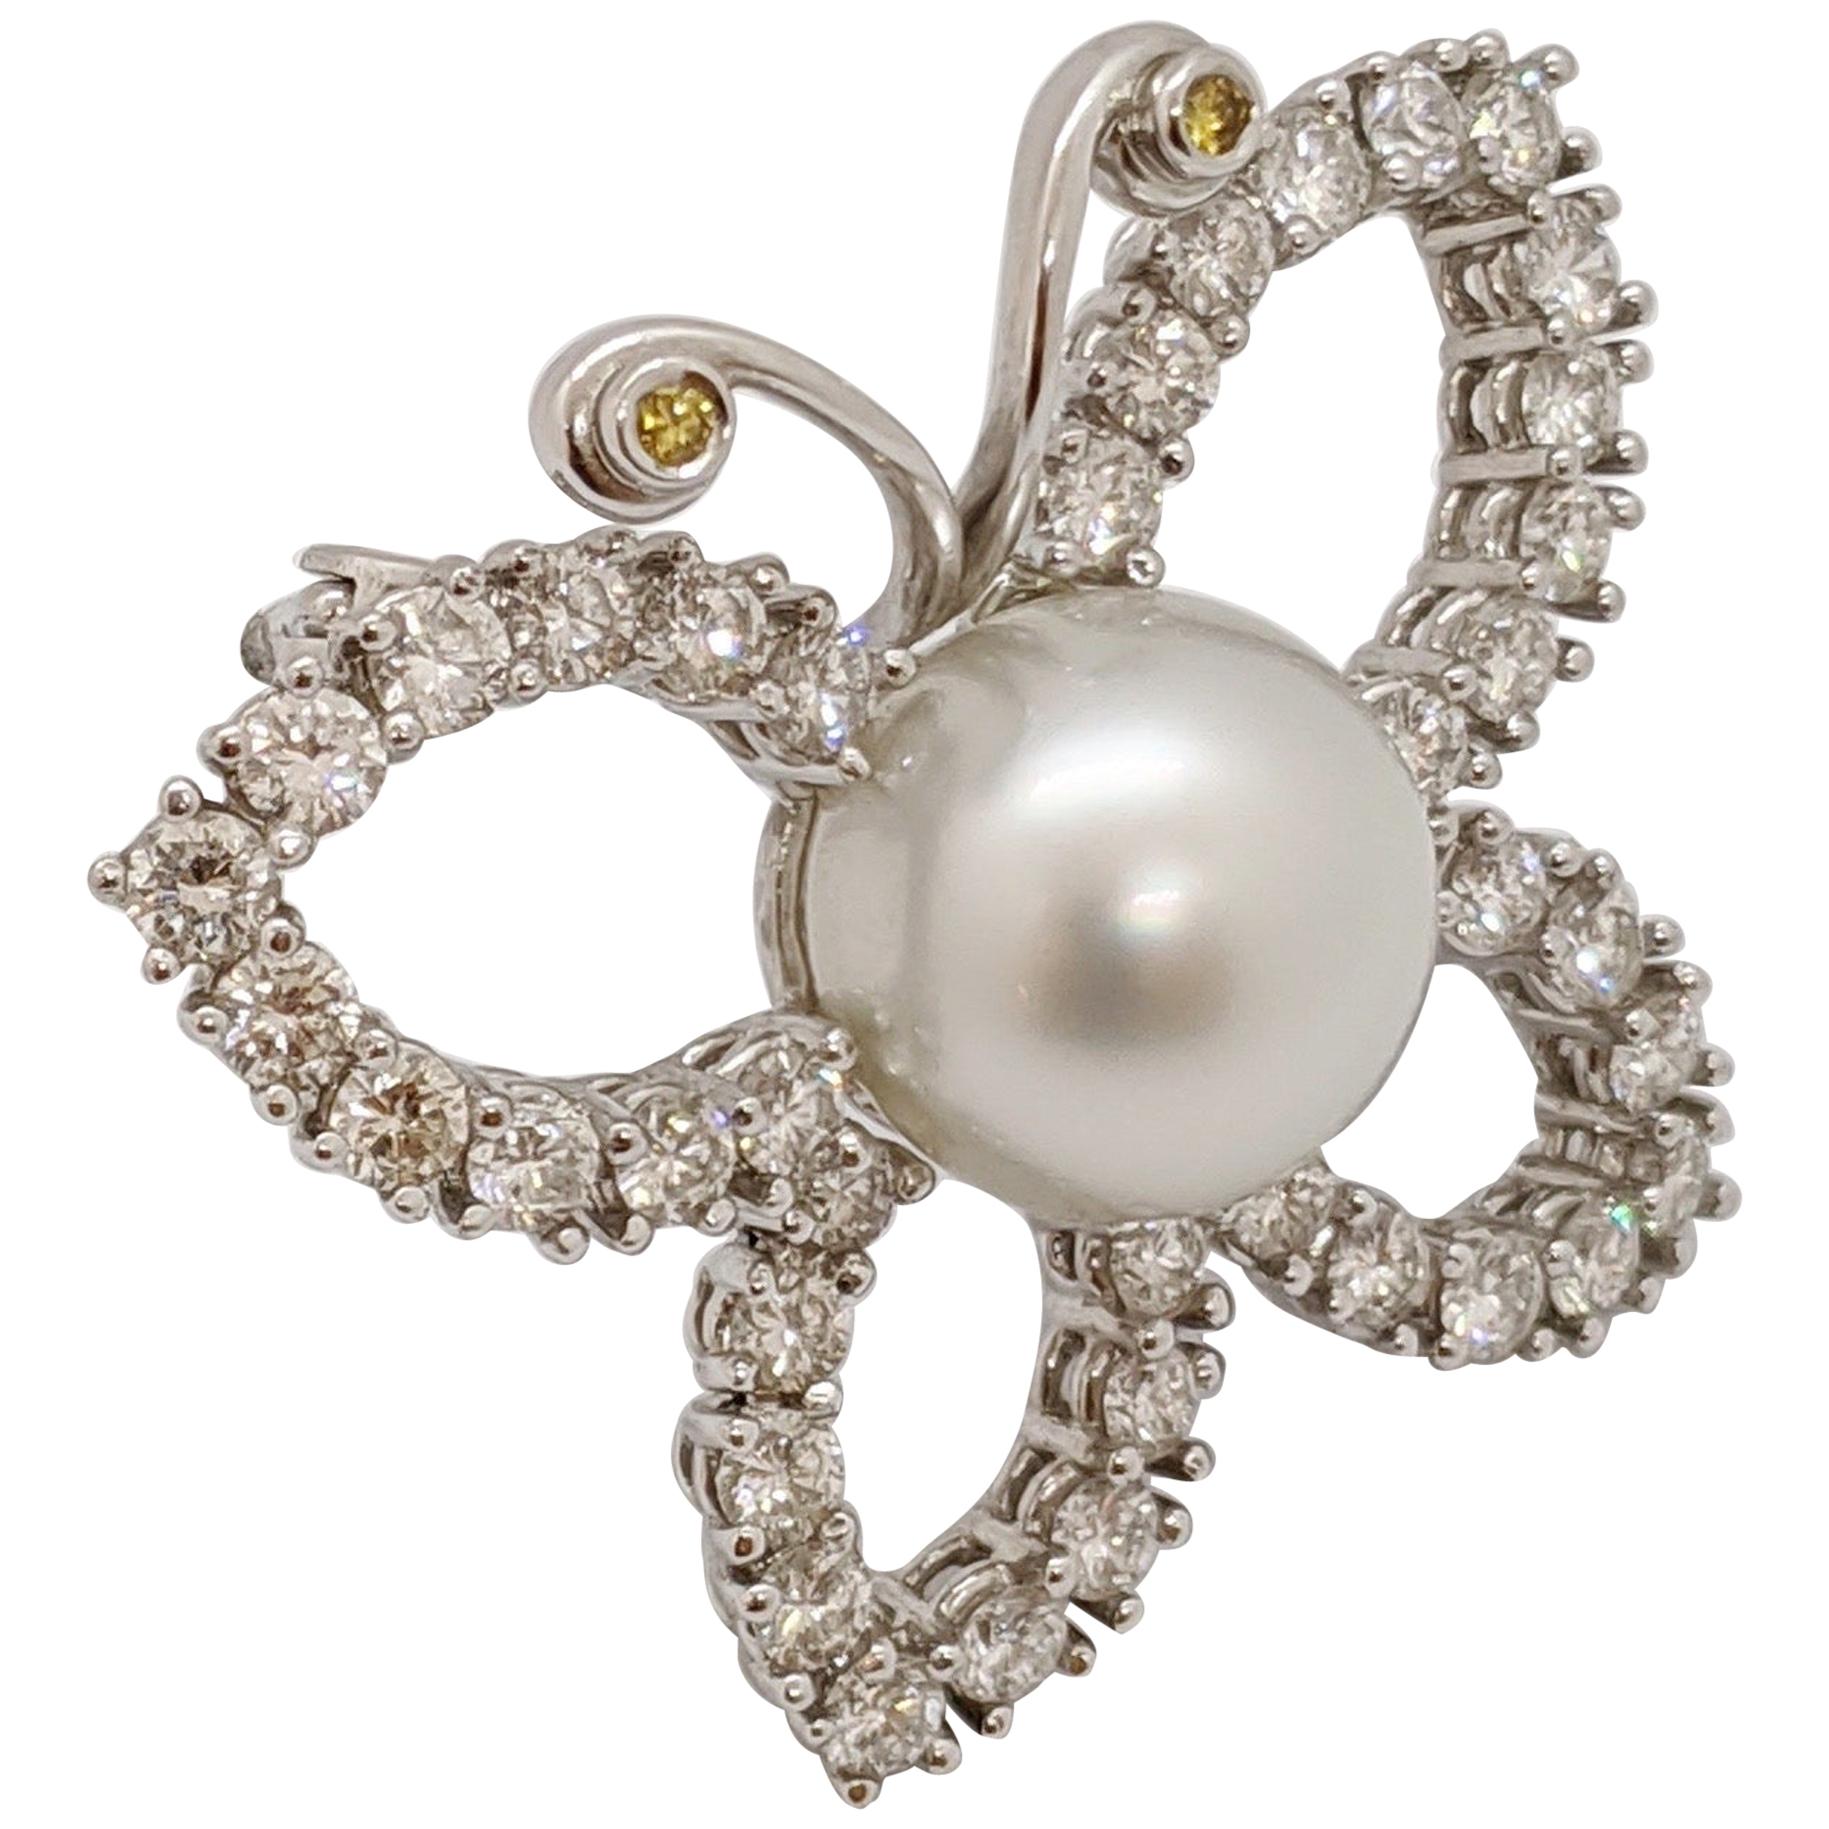 Platinum and 2.29 Carat Diamond Butterfly Brooch with South Sea Pearl Center